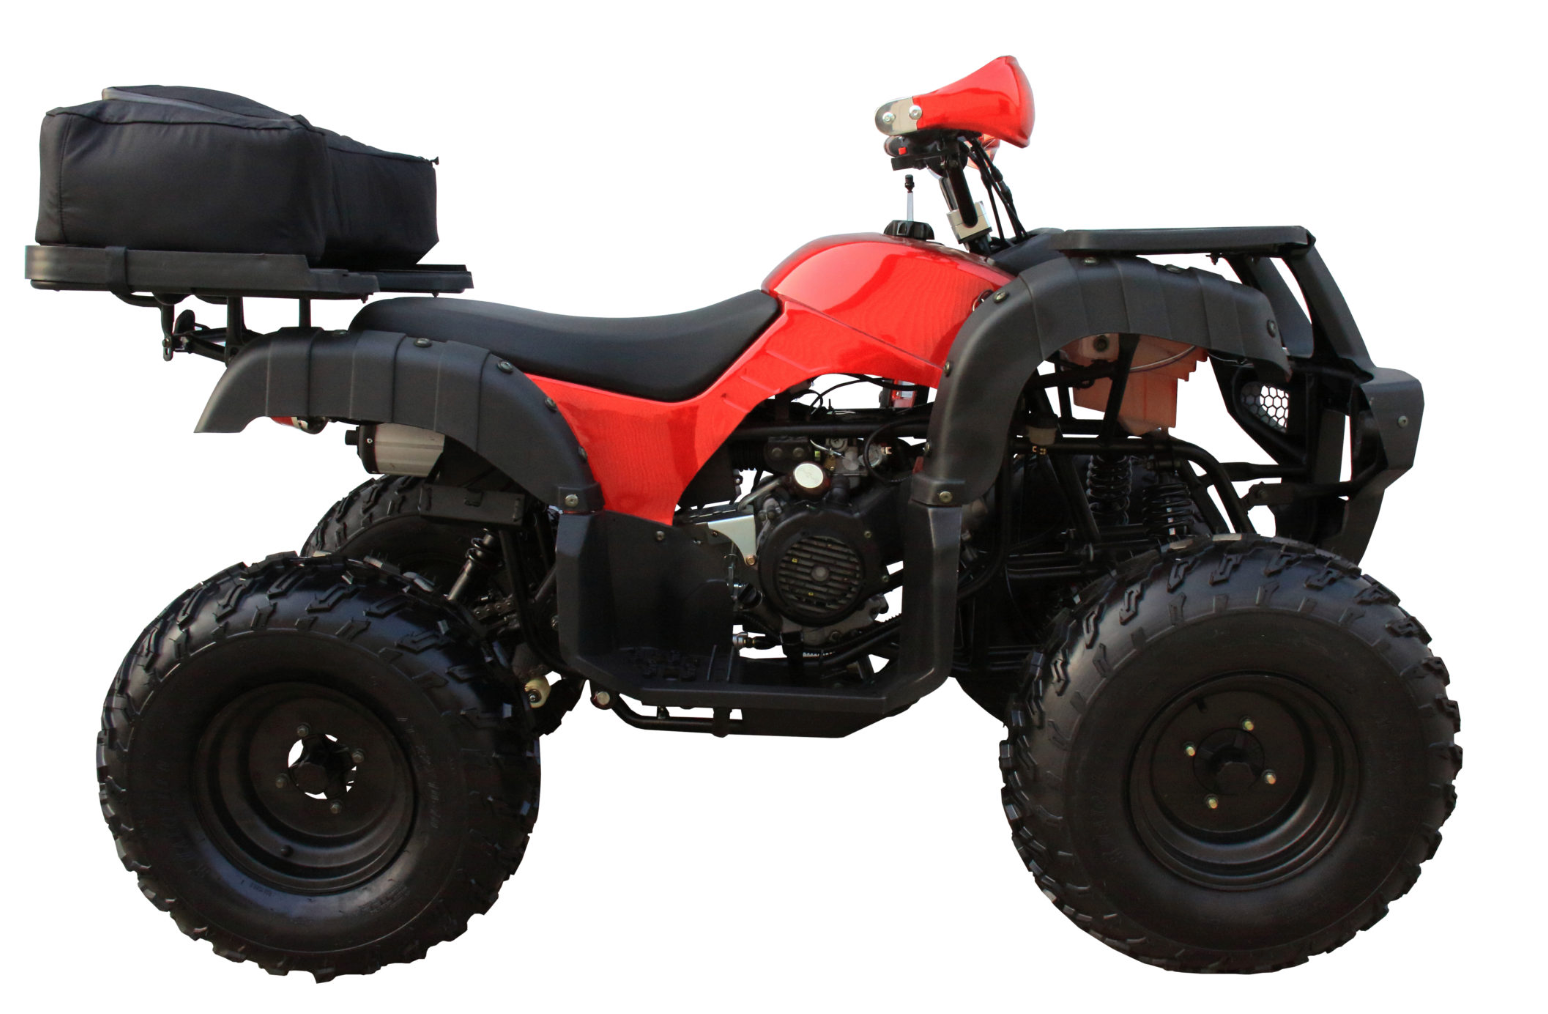 Coolster 3150DX-4 150cc Off Road Four Wheeler Gas ATV